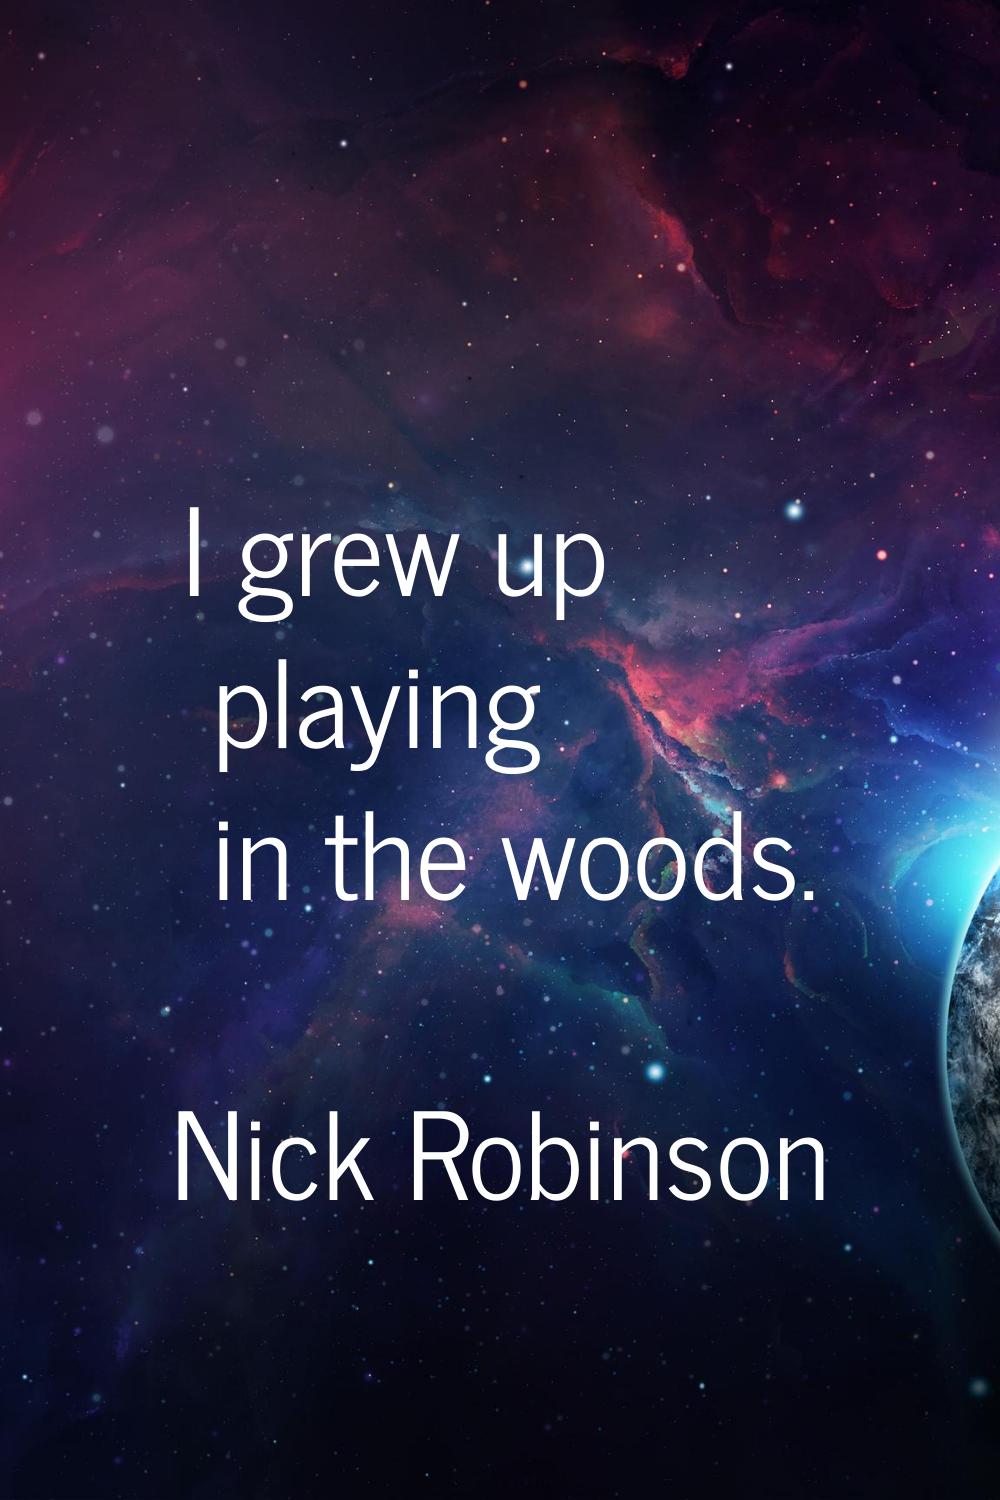 I grew up playing in the woods.